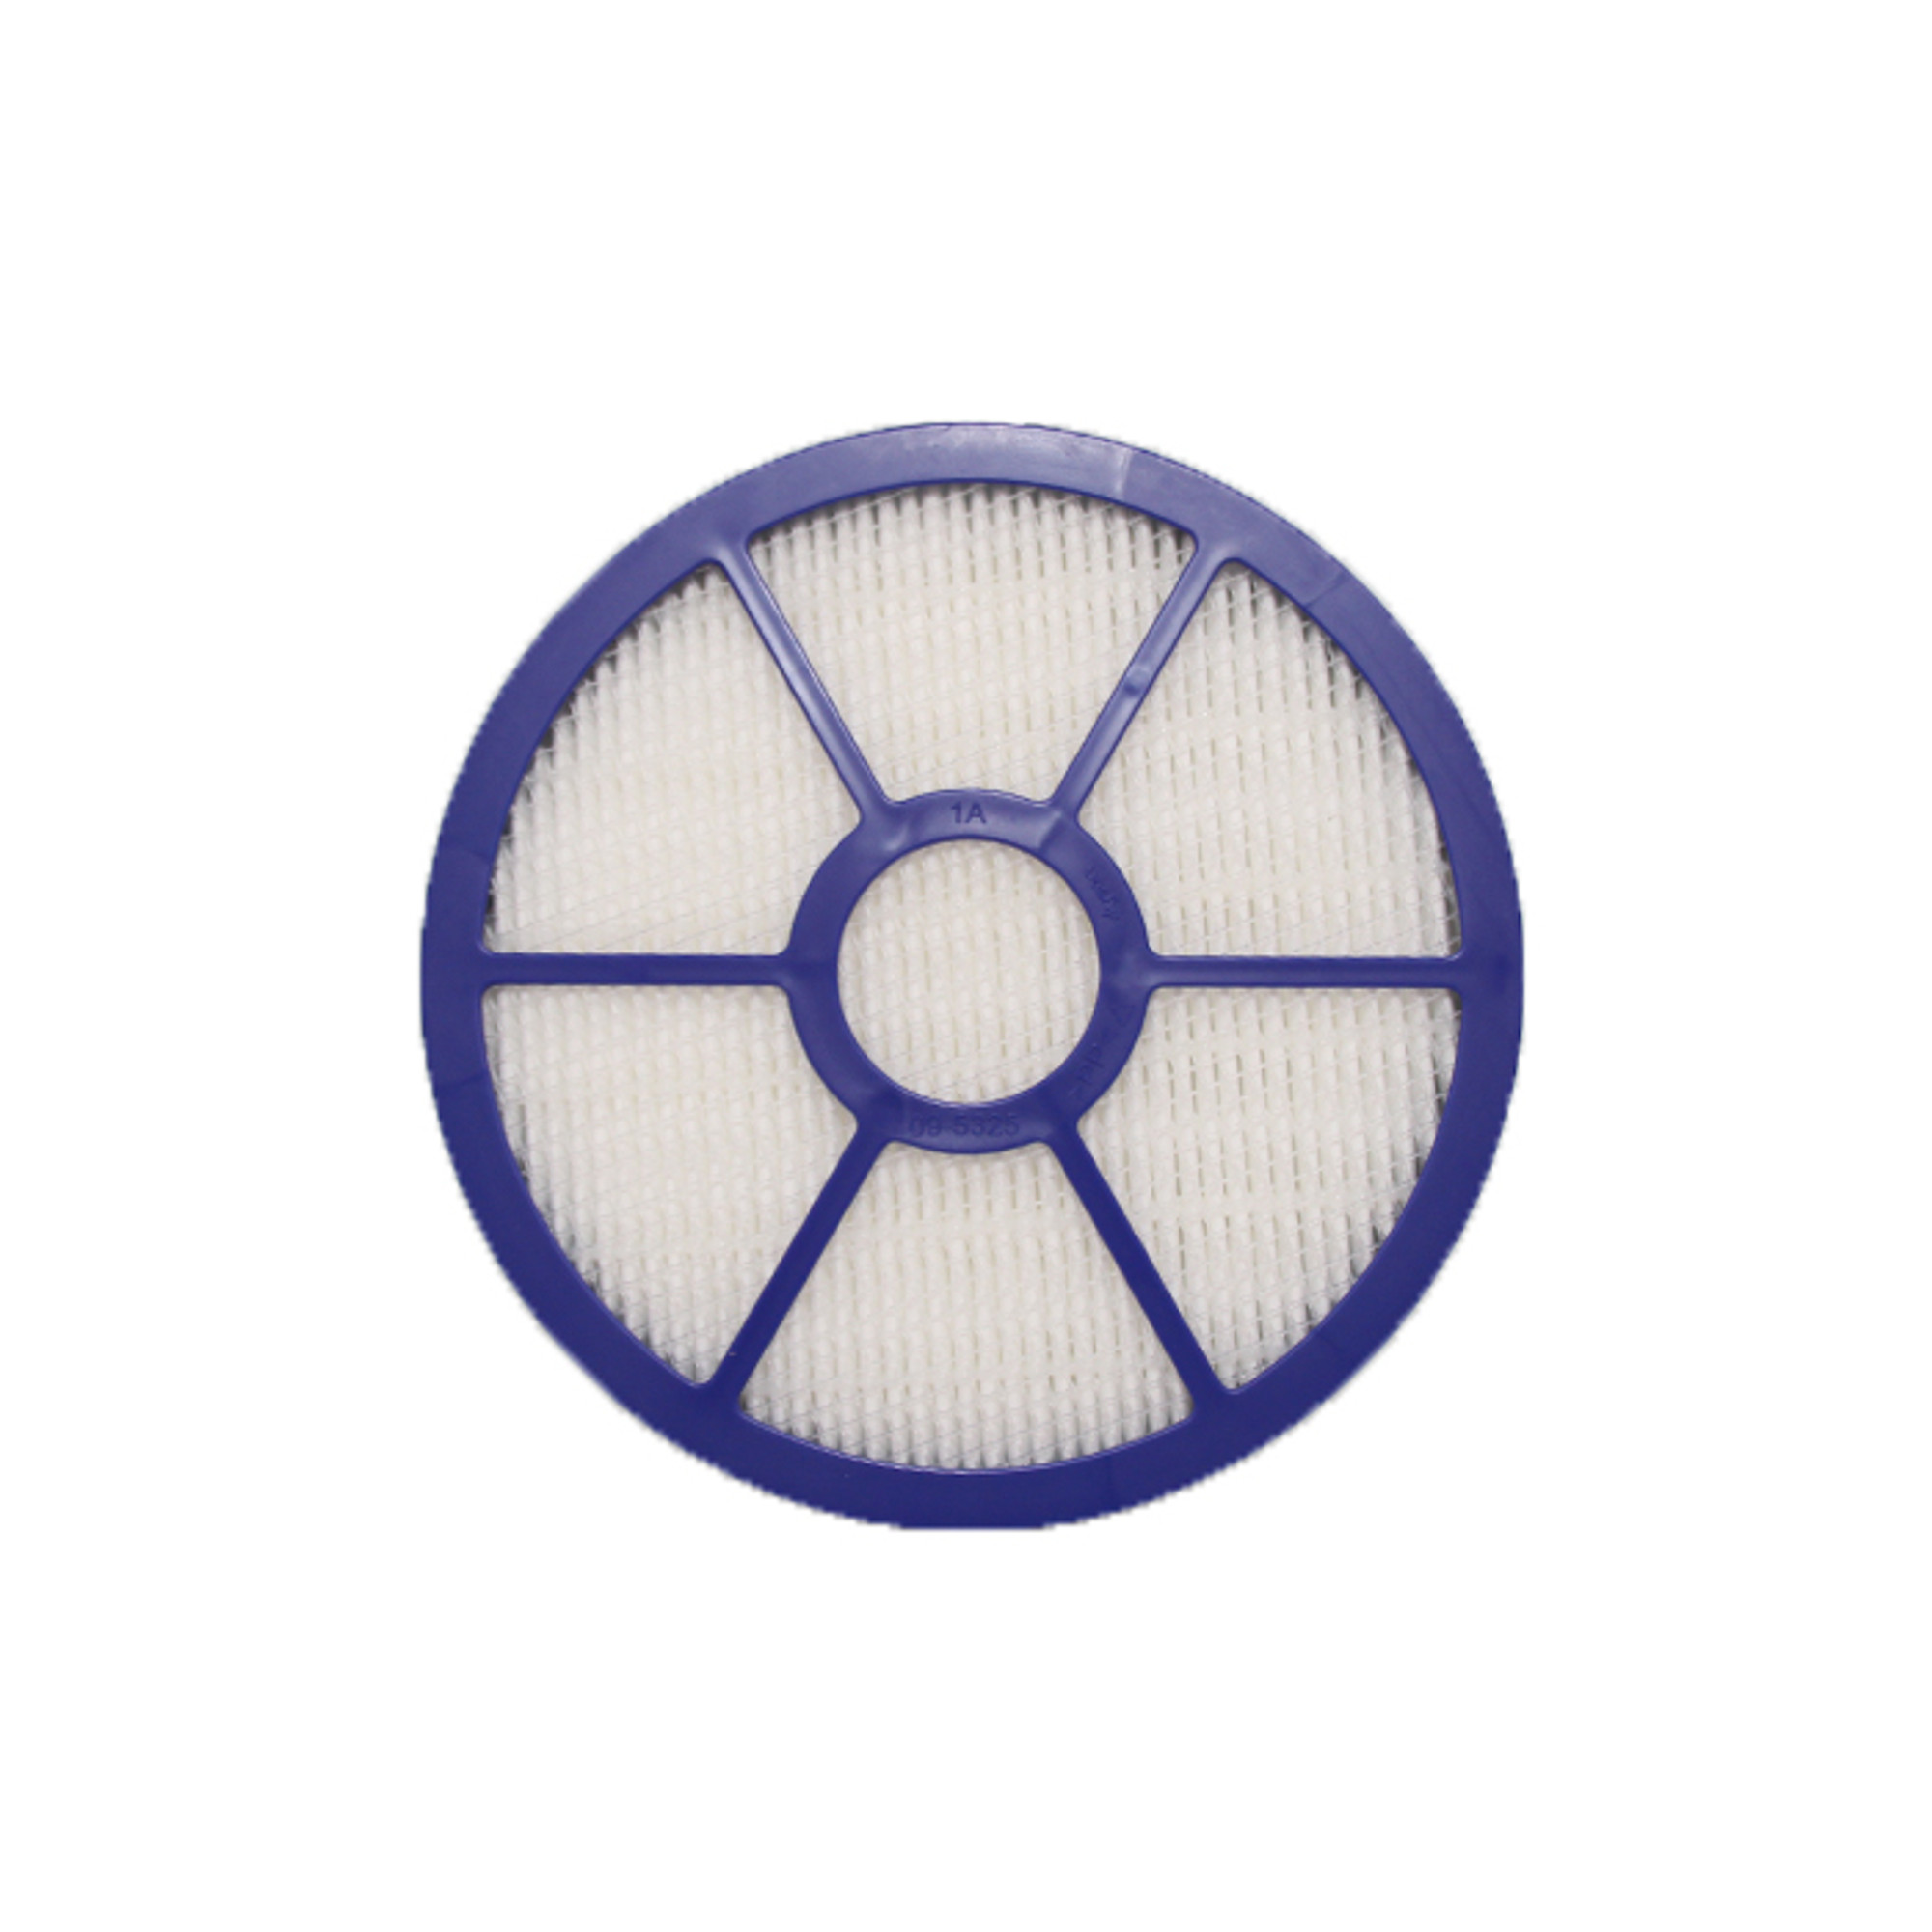 Buy Dyson DC33 HEPA Filter from Canada at McHardyvac.com